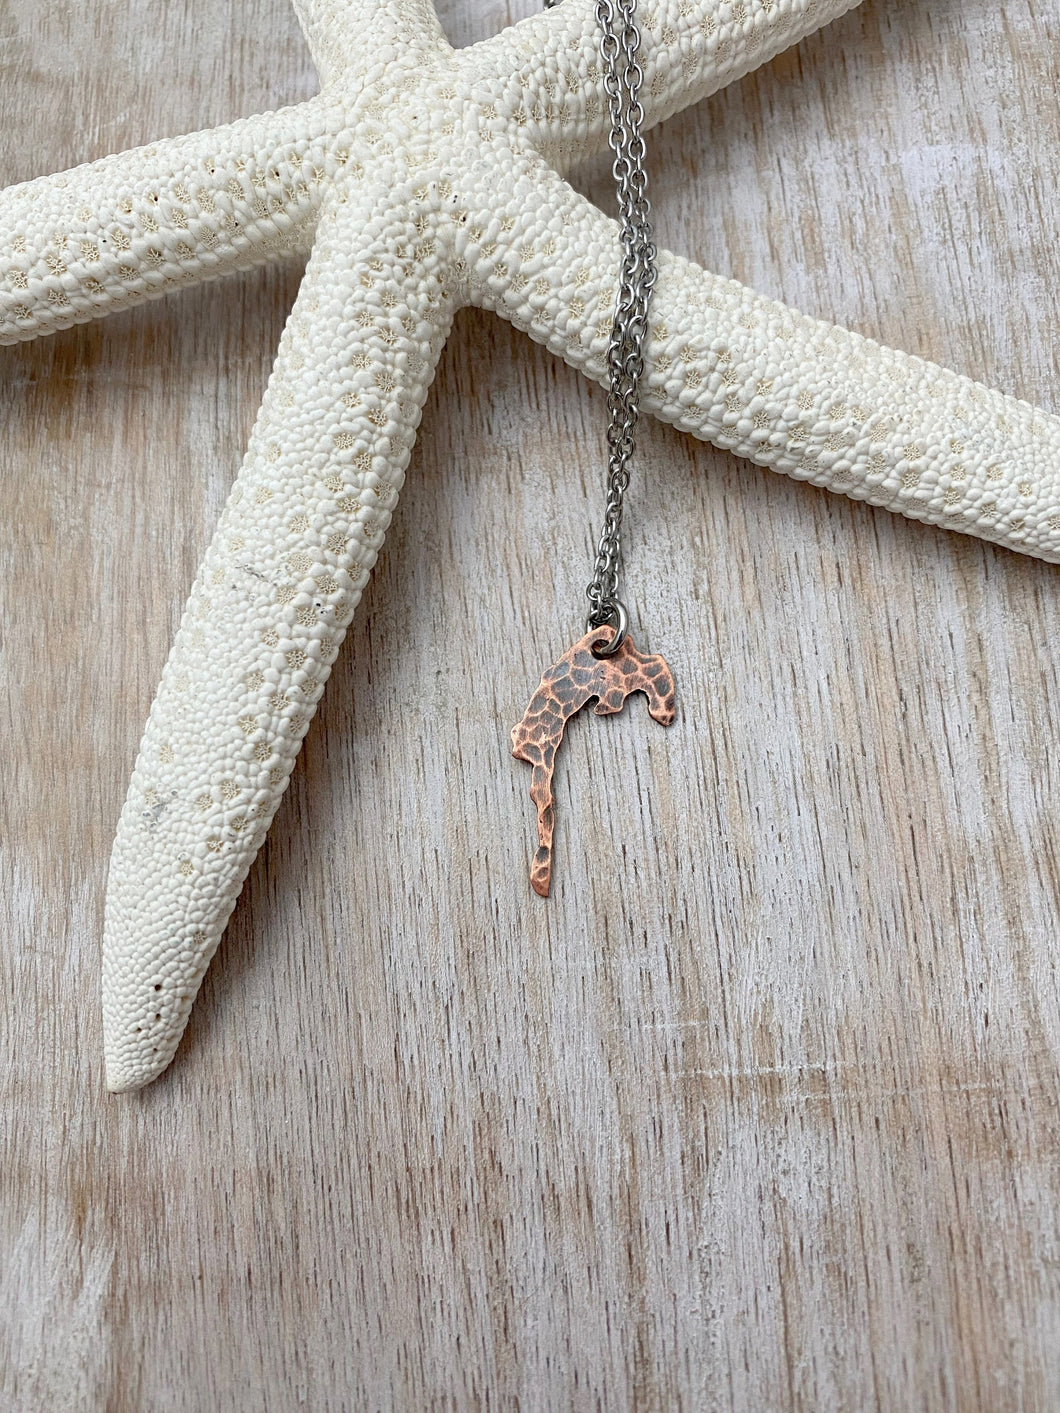 Camano Island Outline Necklace -  Washington State Rustic Copper with stainless steel chain - PNW